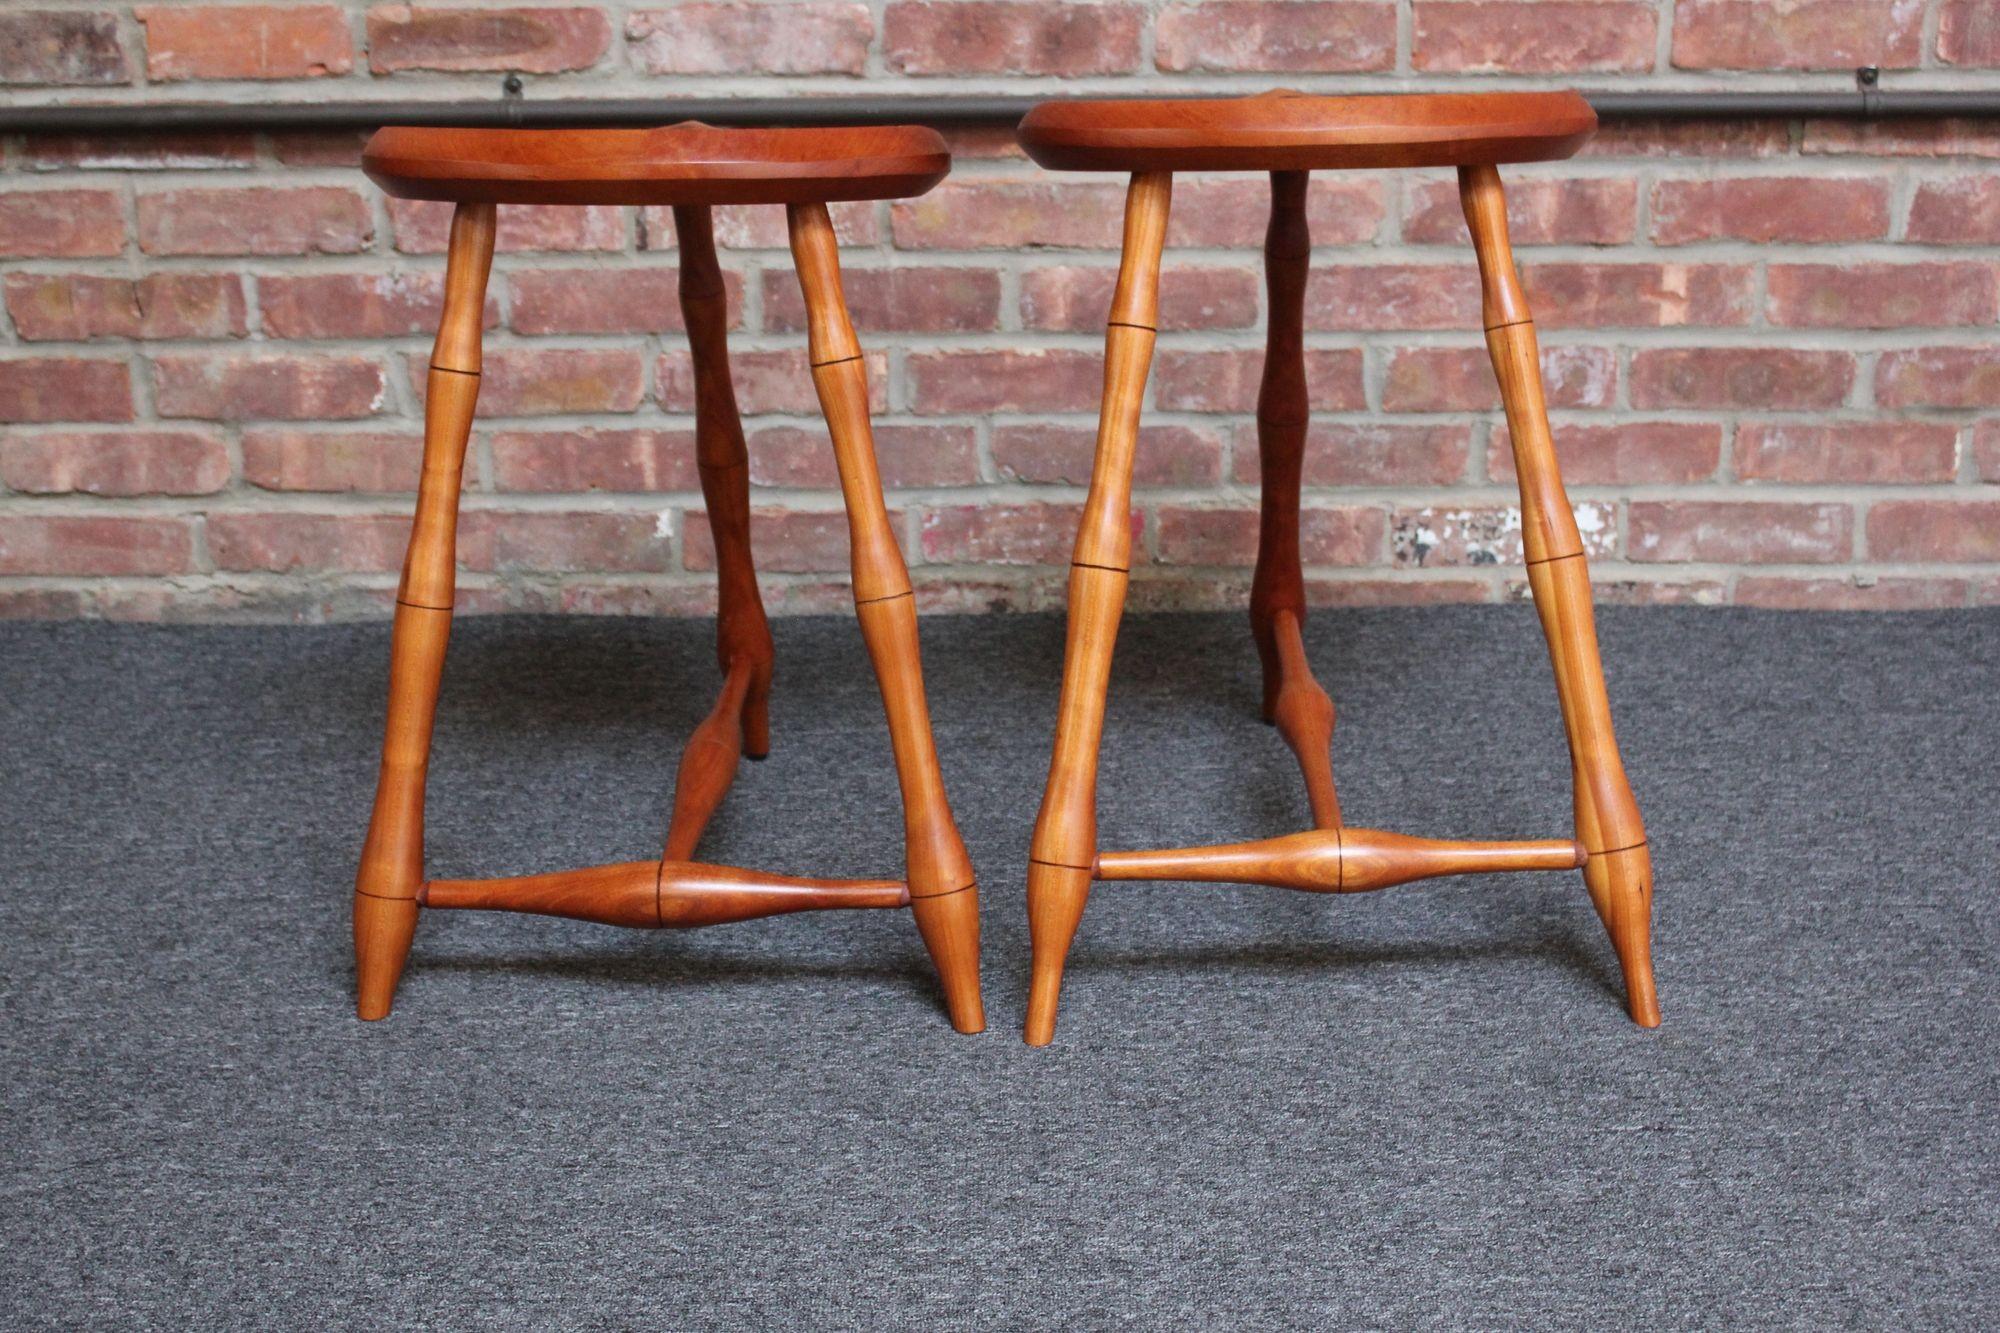 Pair of Vintage Studio Craft Windsor-Style Three Legged Low Stools in Cherrywood For Sale 13